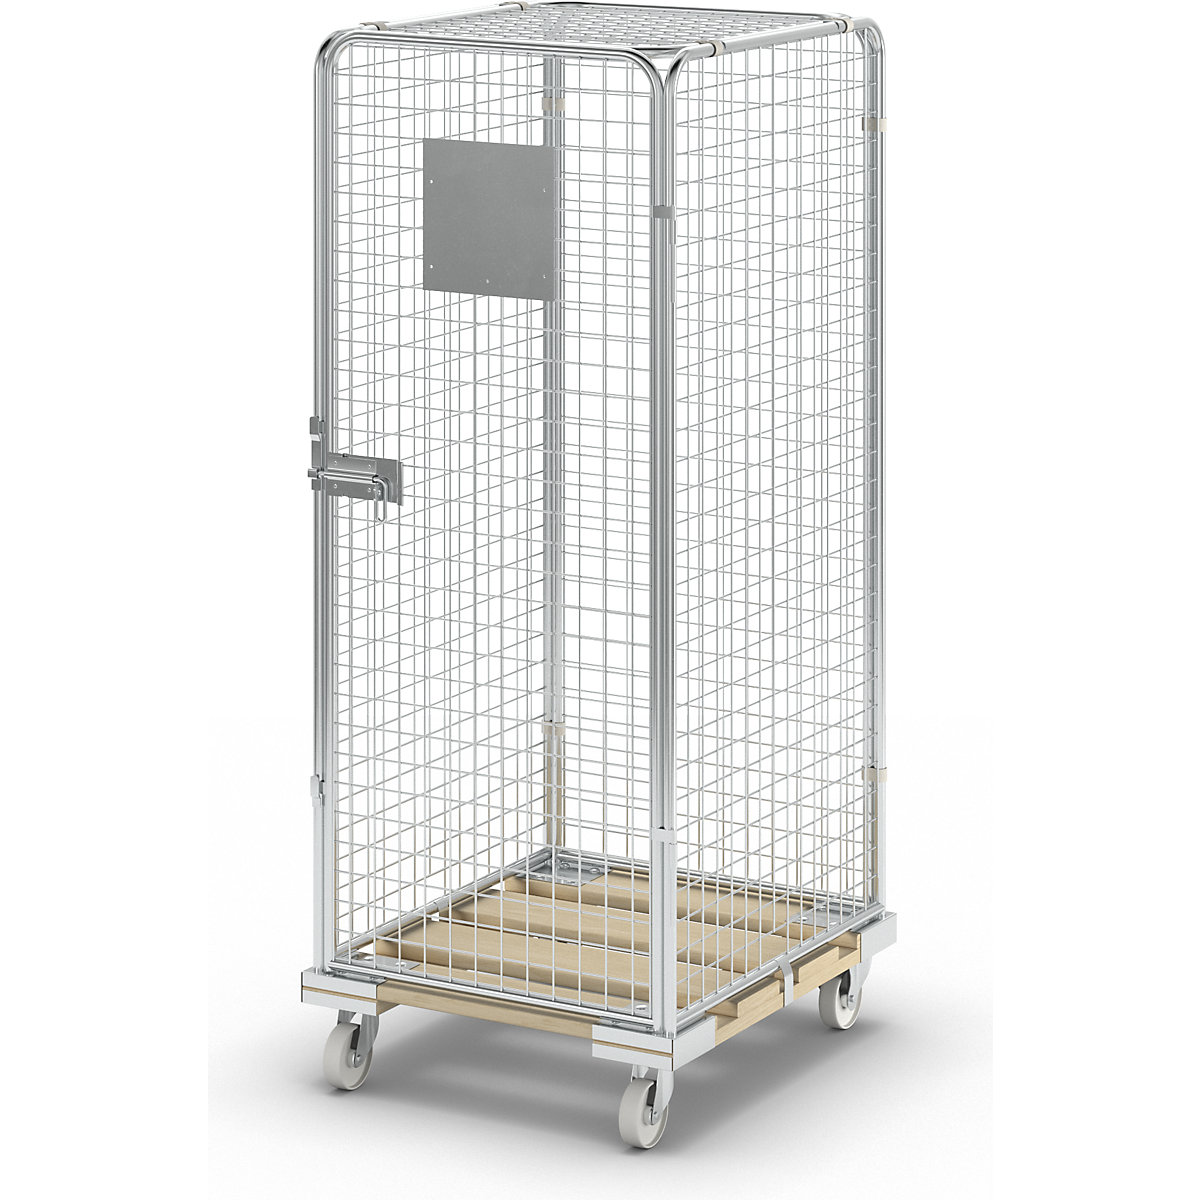 Security roll container with wooden dolly, effective height 1585 mm, with 1 door-2